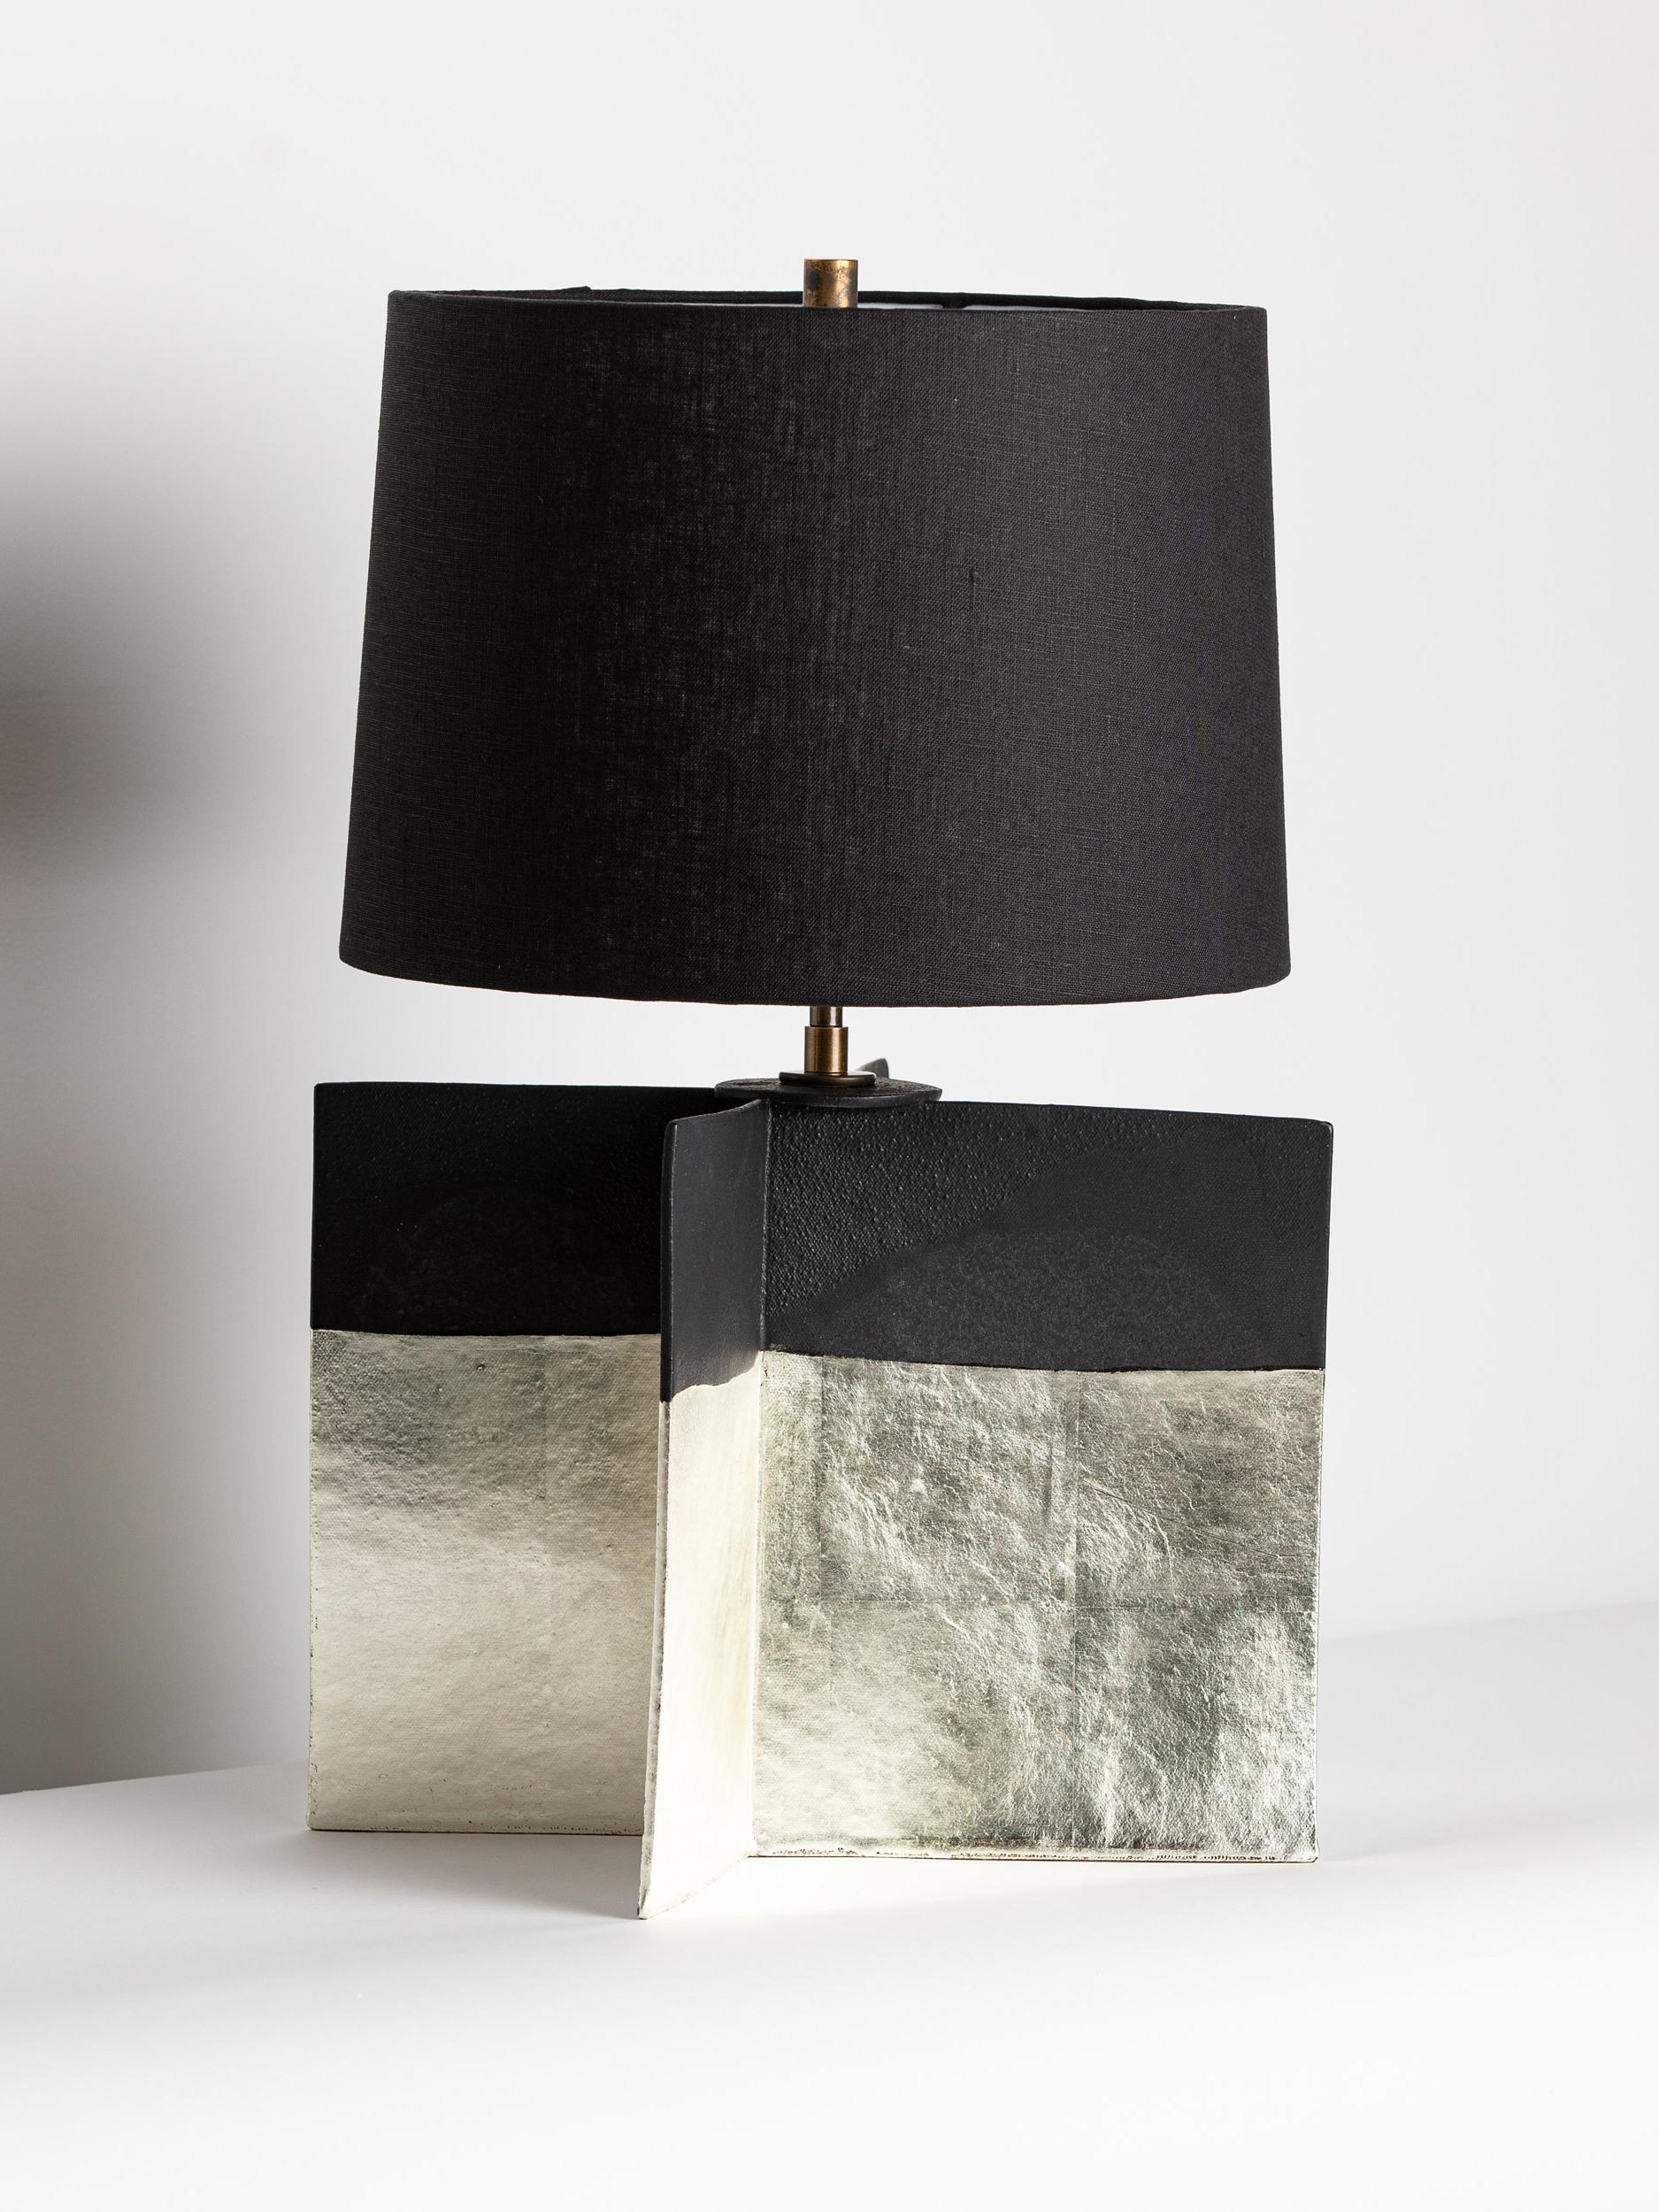 This limited edition Truro Lamp is the product of our collaboration with artist and master-gilder Carol Leskanic. Once glazed, 12K-white-gold leaf is applied to the handcrafted stoneware using a traditional oil gilding method.

FINISH

-